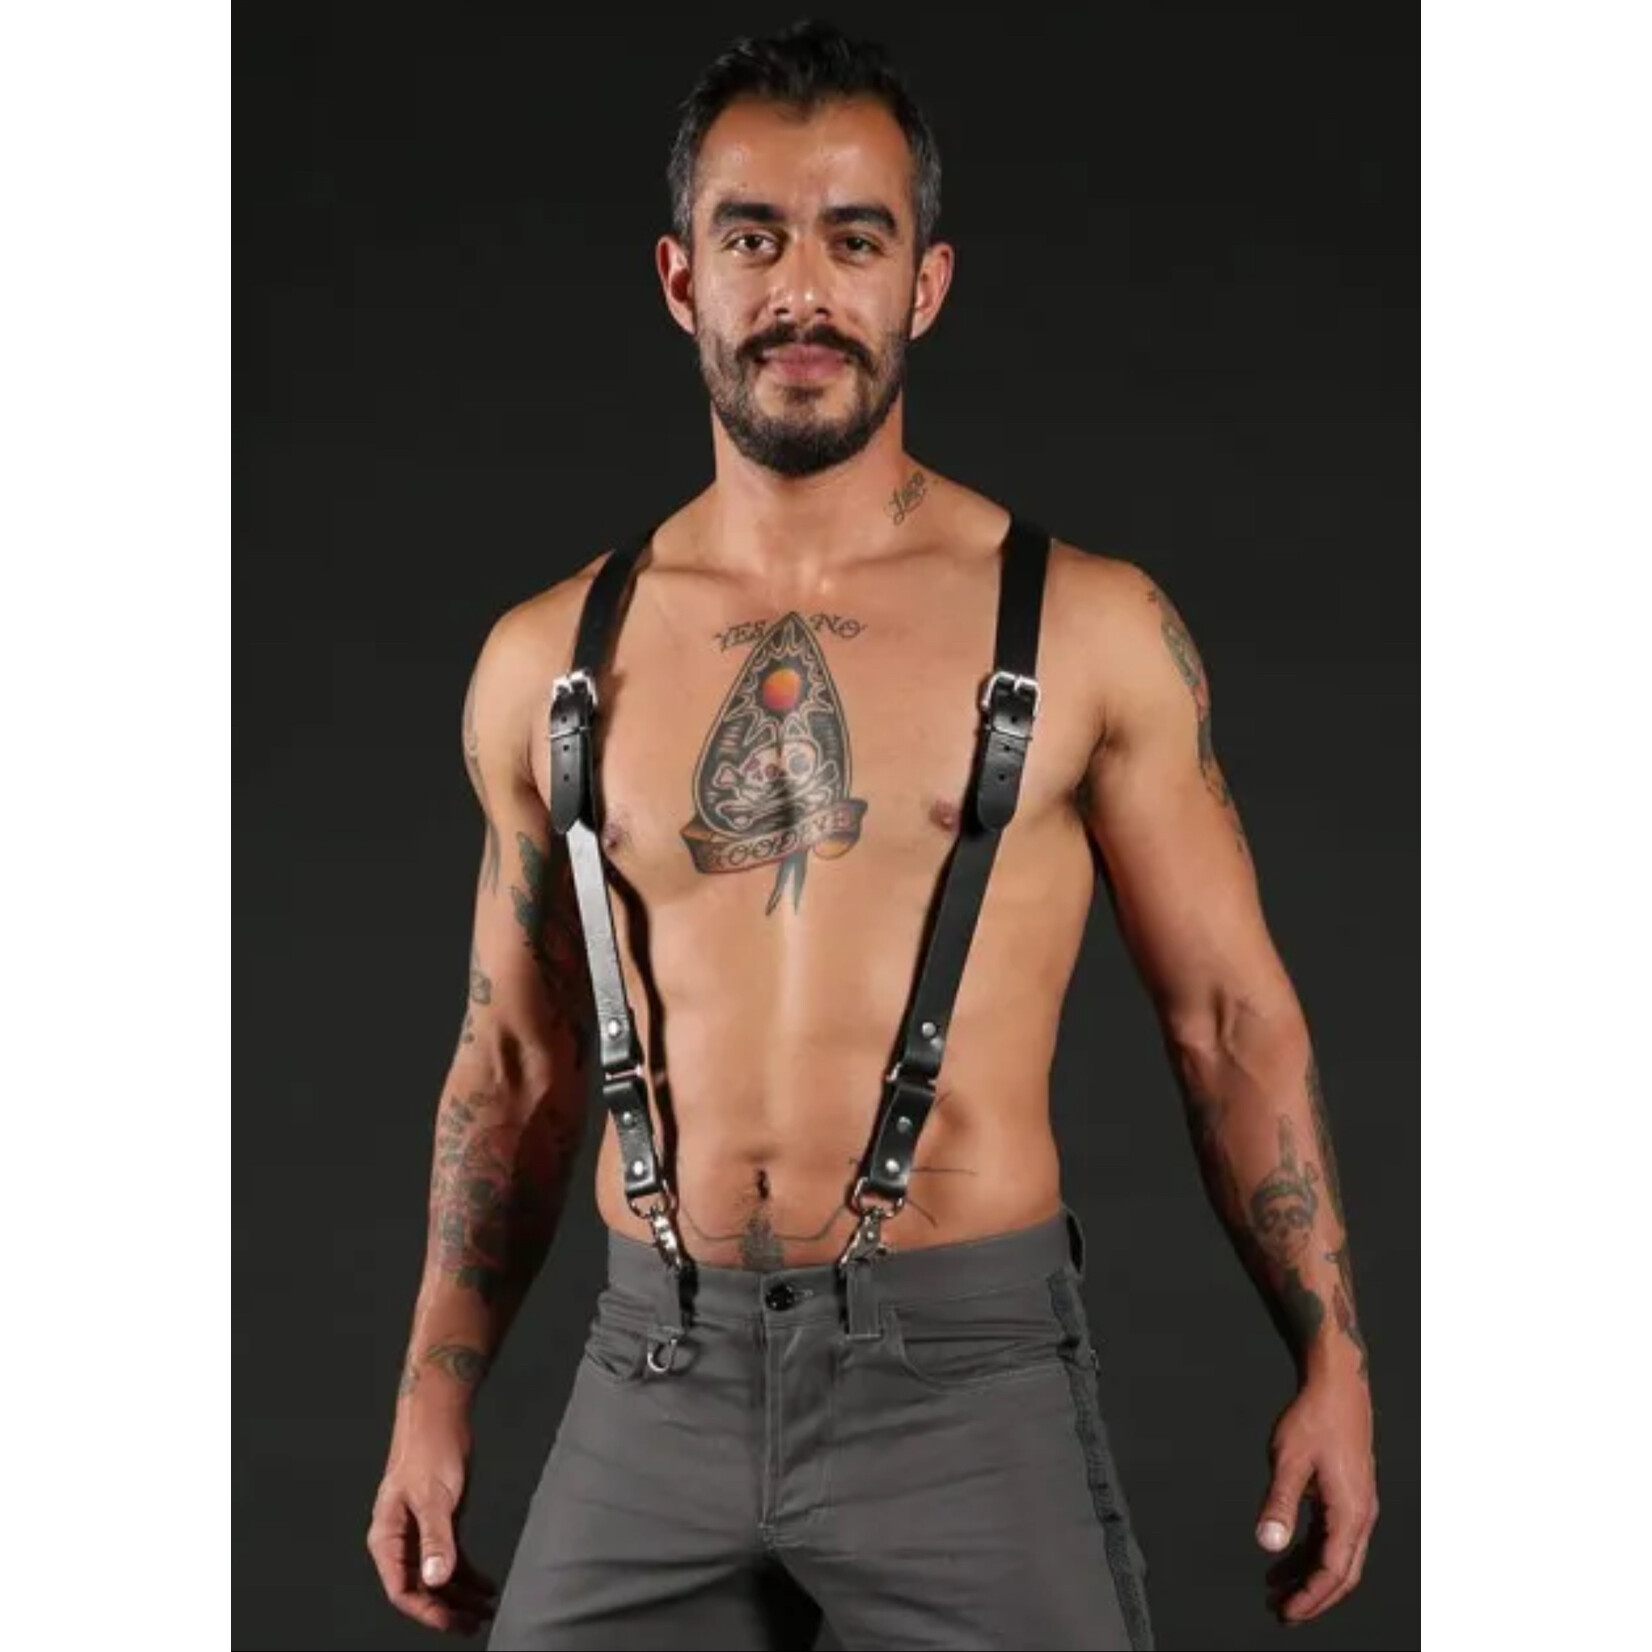 Mr. S Leather Mr. S Leather - Leather Patrol Harness/Suspender Combo- Black - One Size